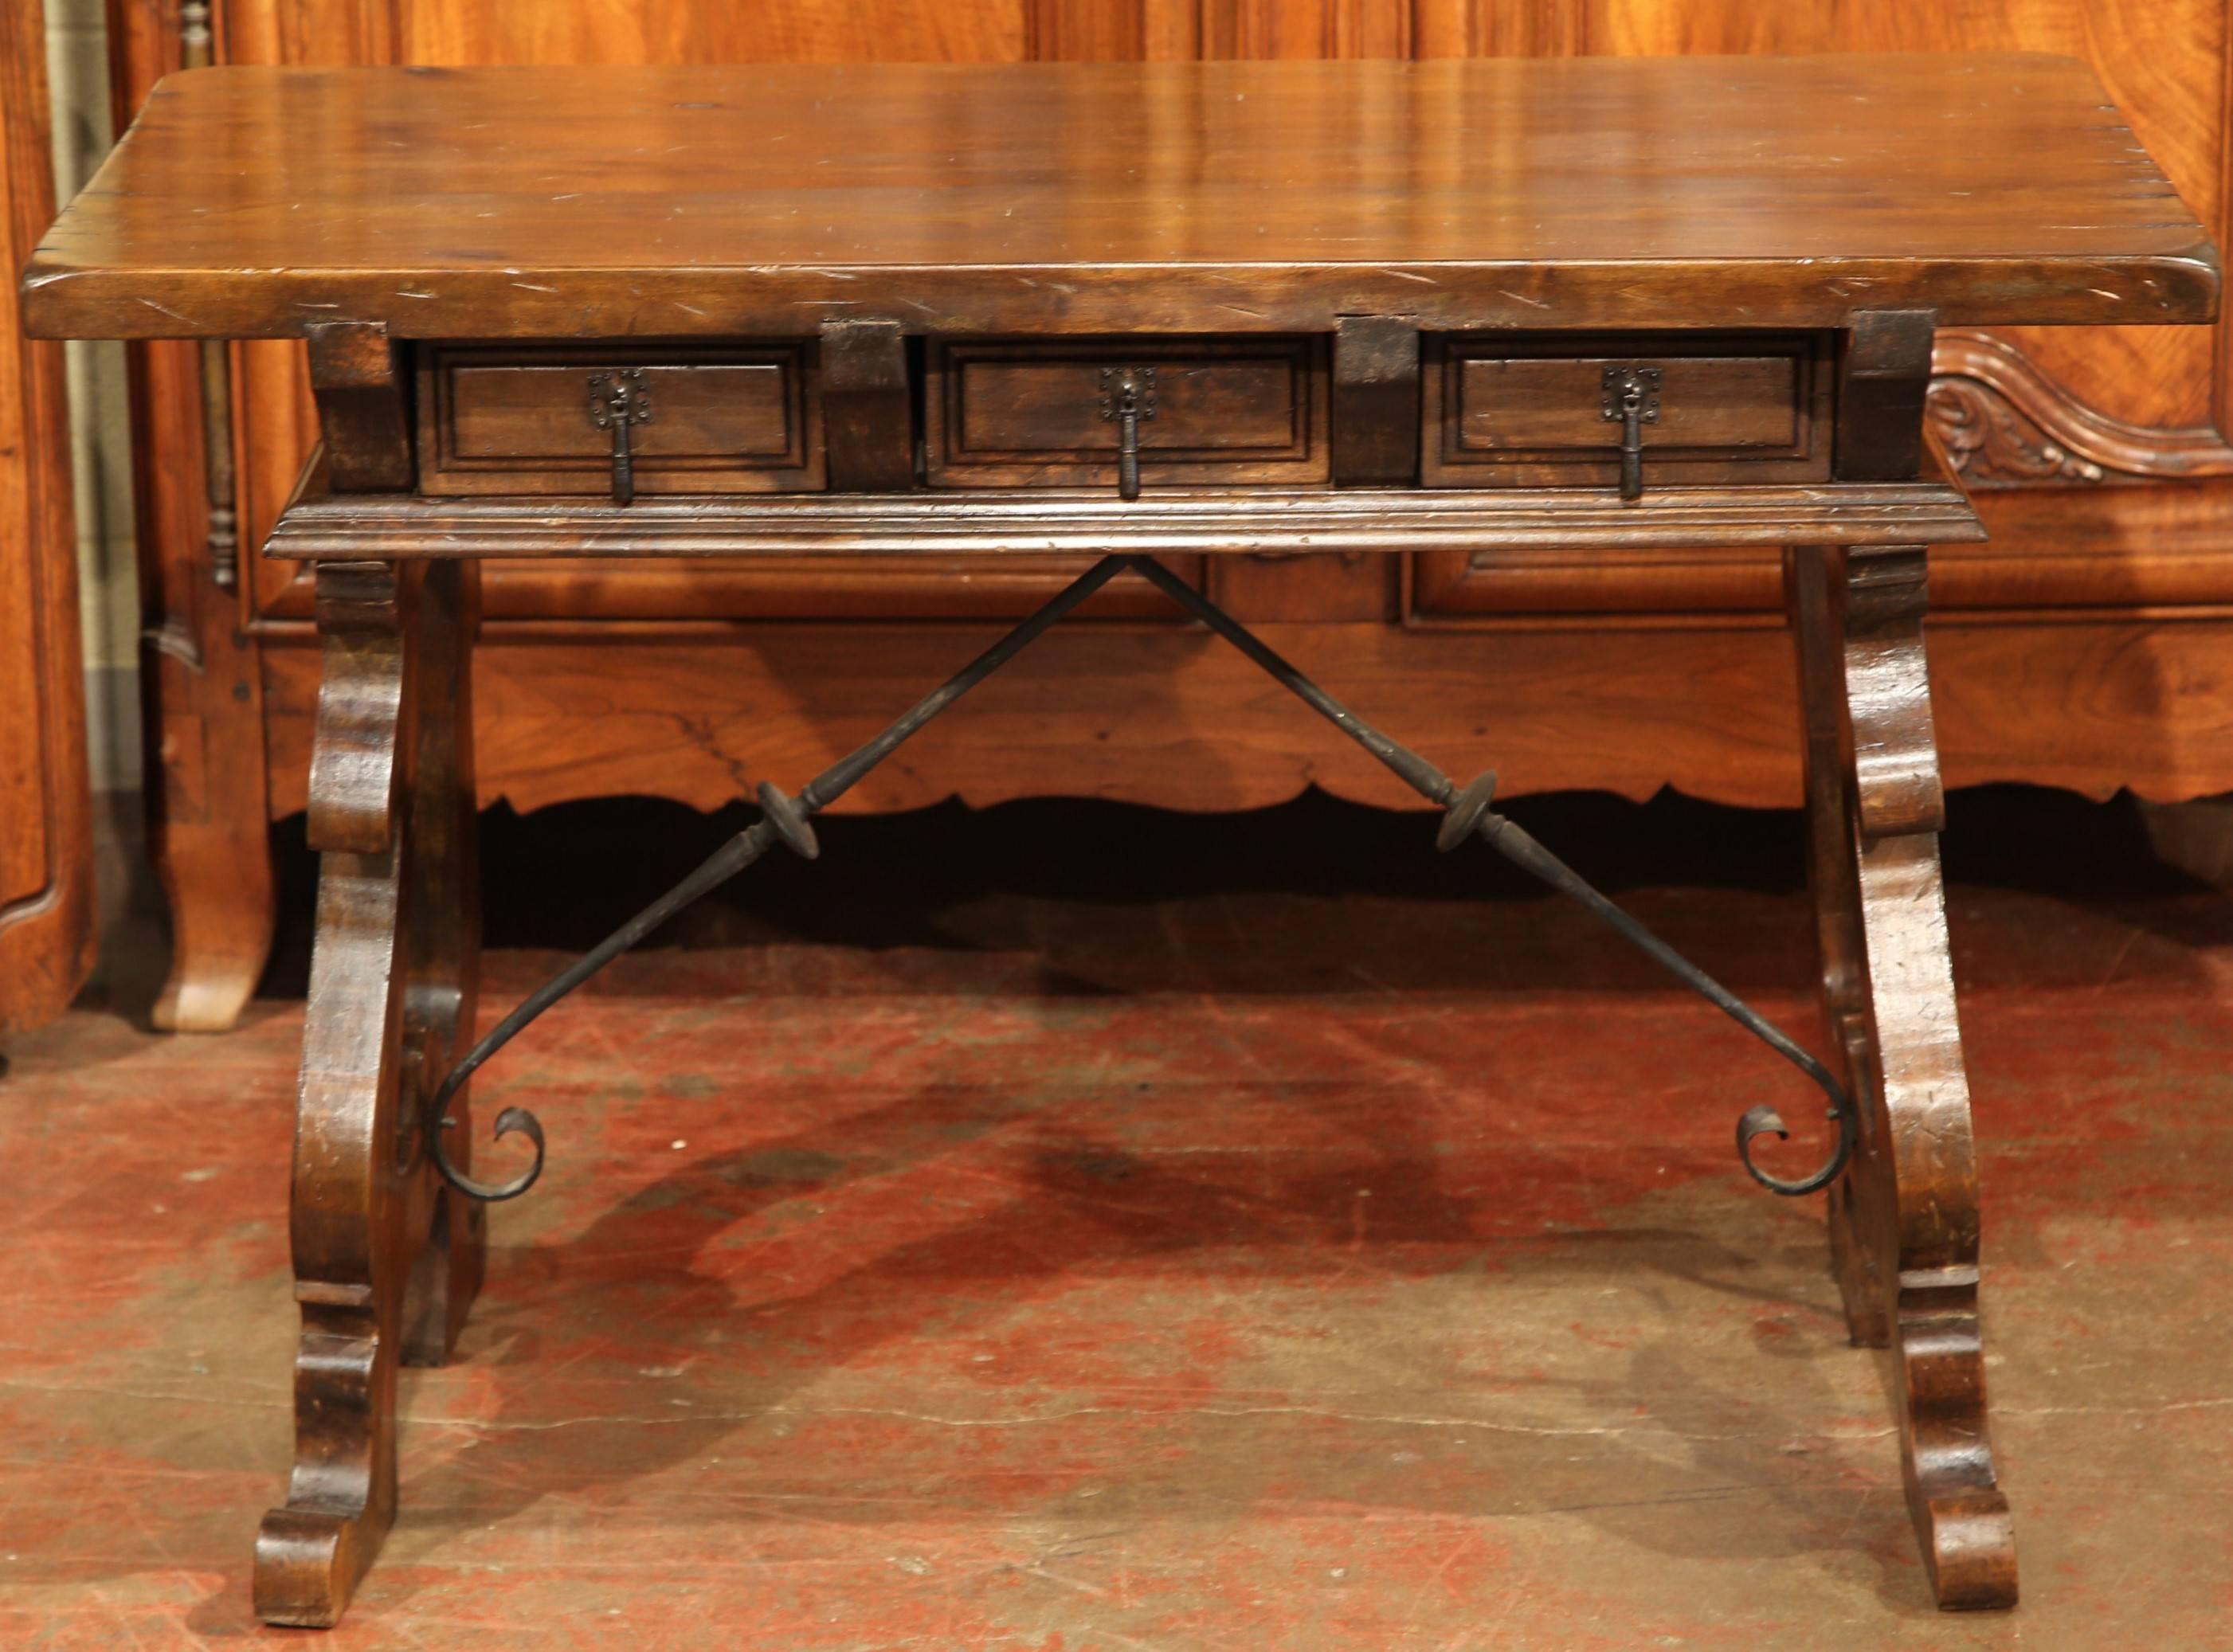 This fine fruitwood writing table was carved in Spain, circa 1920. The small table has a pair of drawers across the front and two carved legs connected with a prominent iron stretcher. This small desk could also be used as an end or side table in a